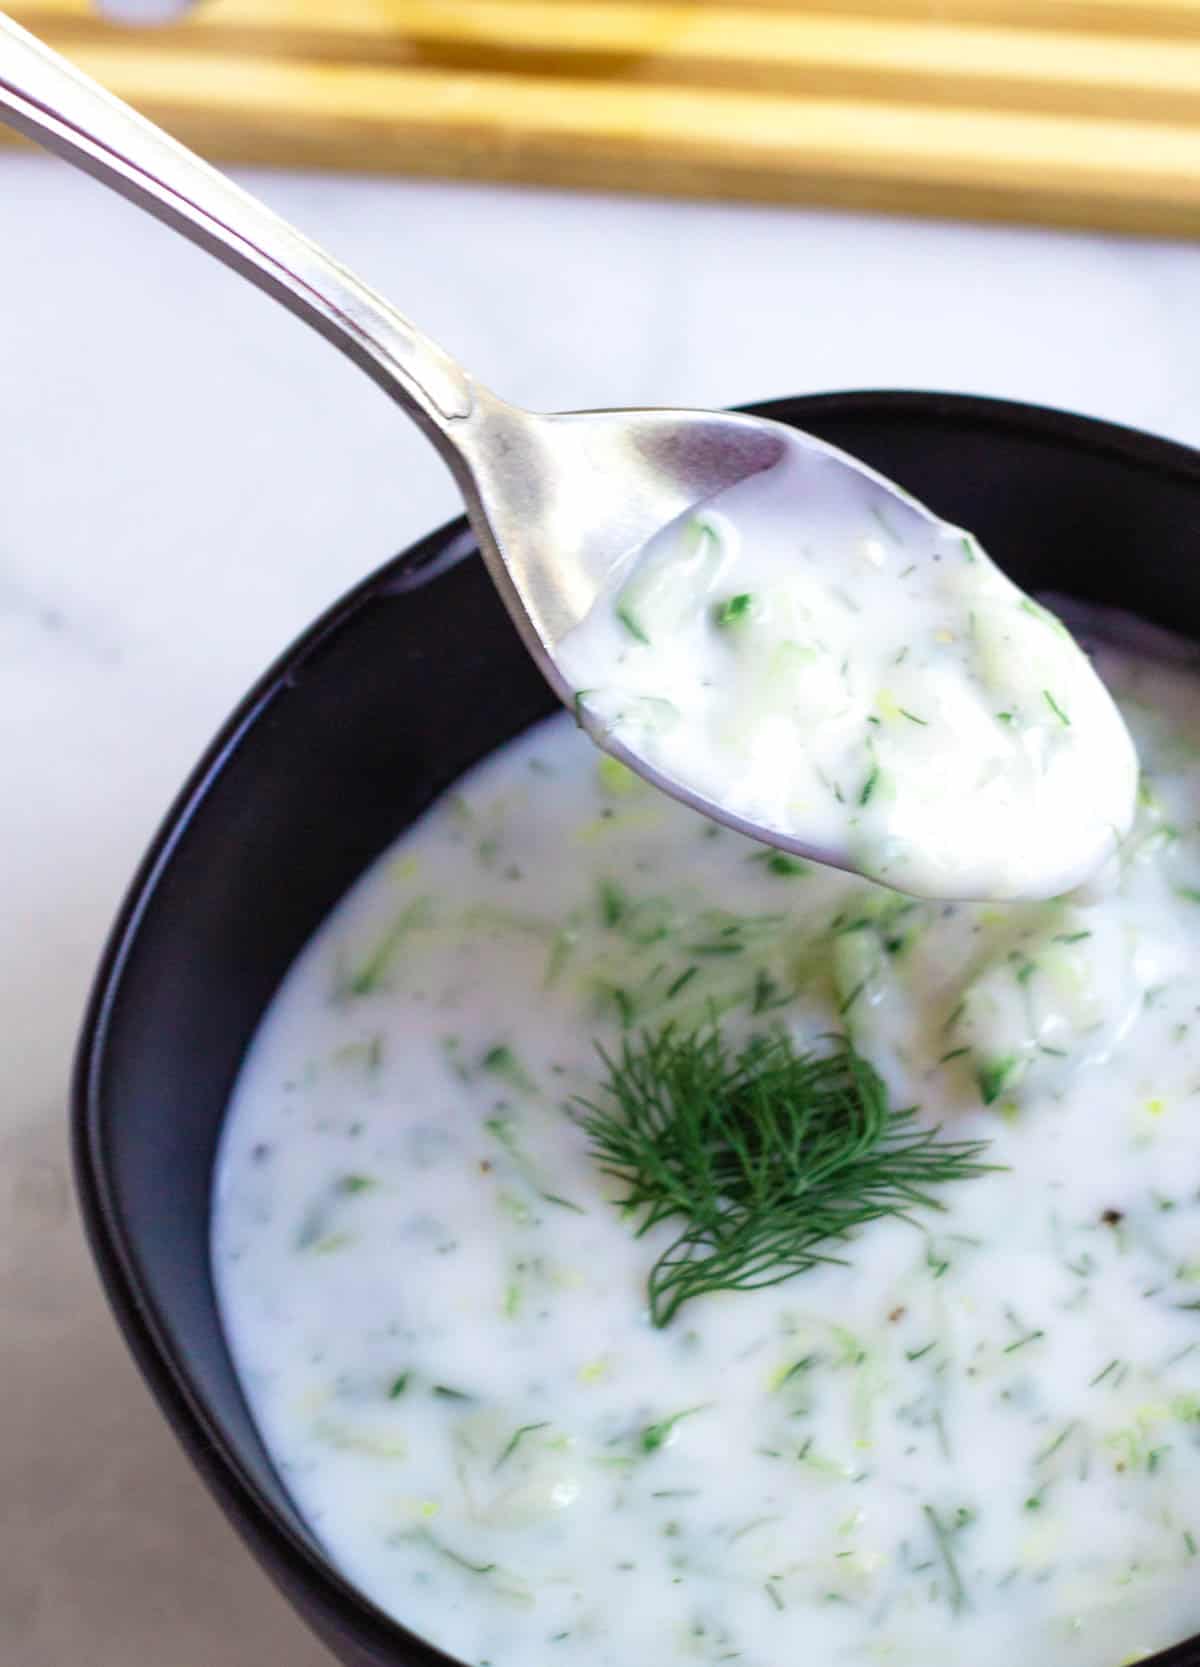 spoon dipped in bowl of tzatziki